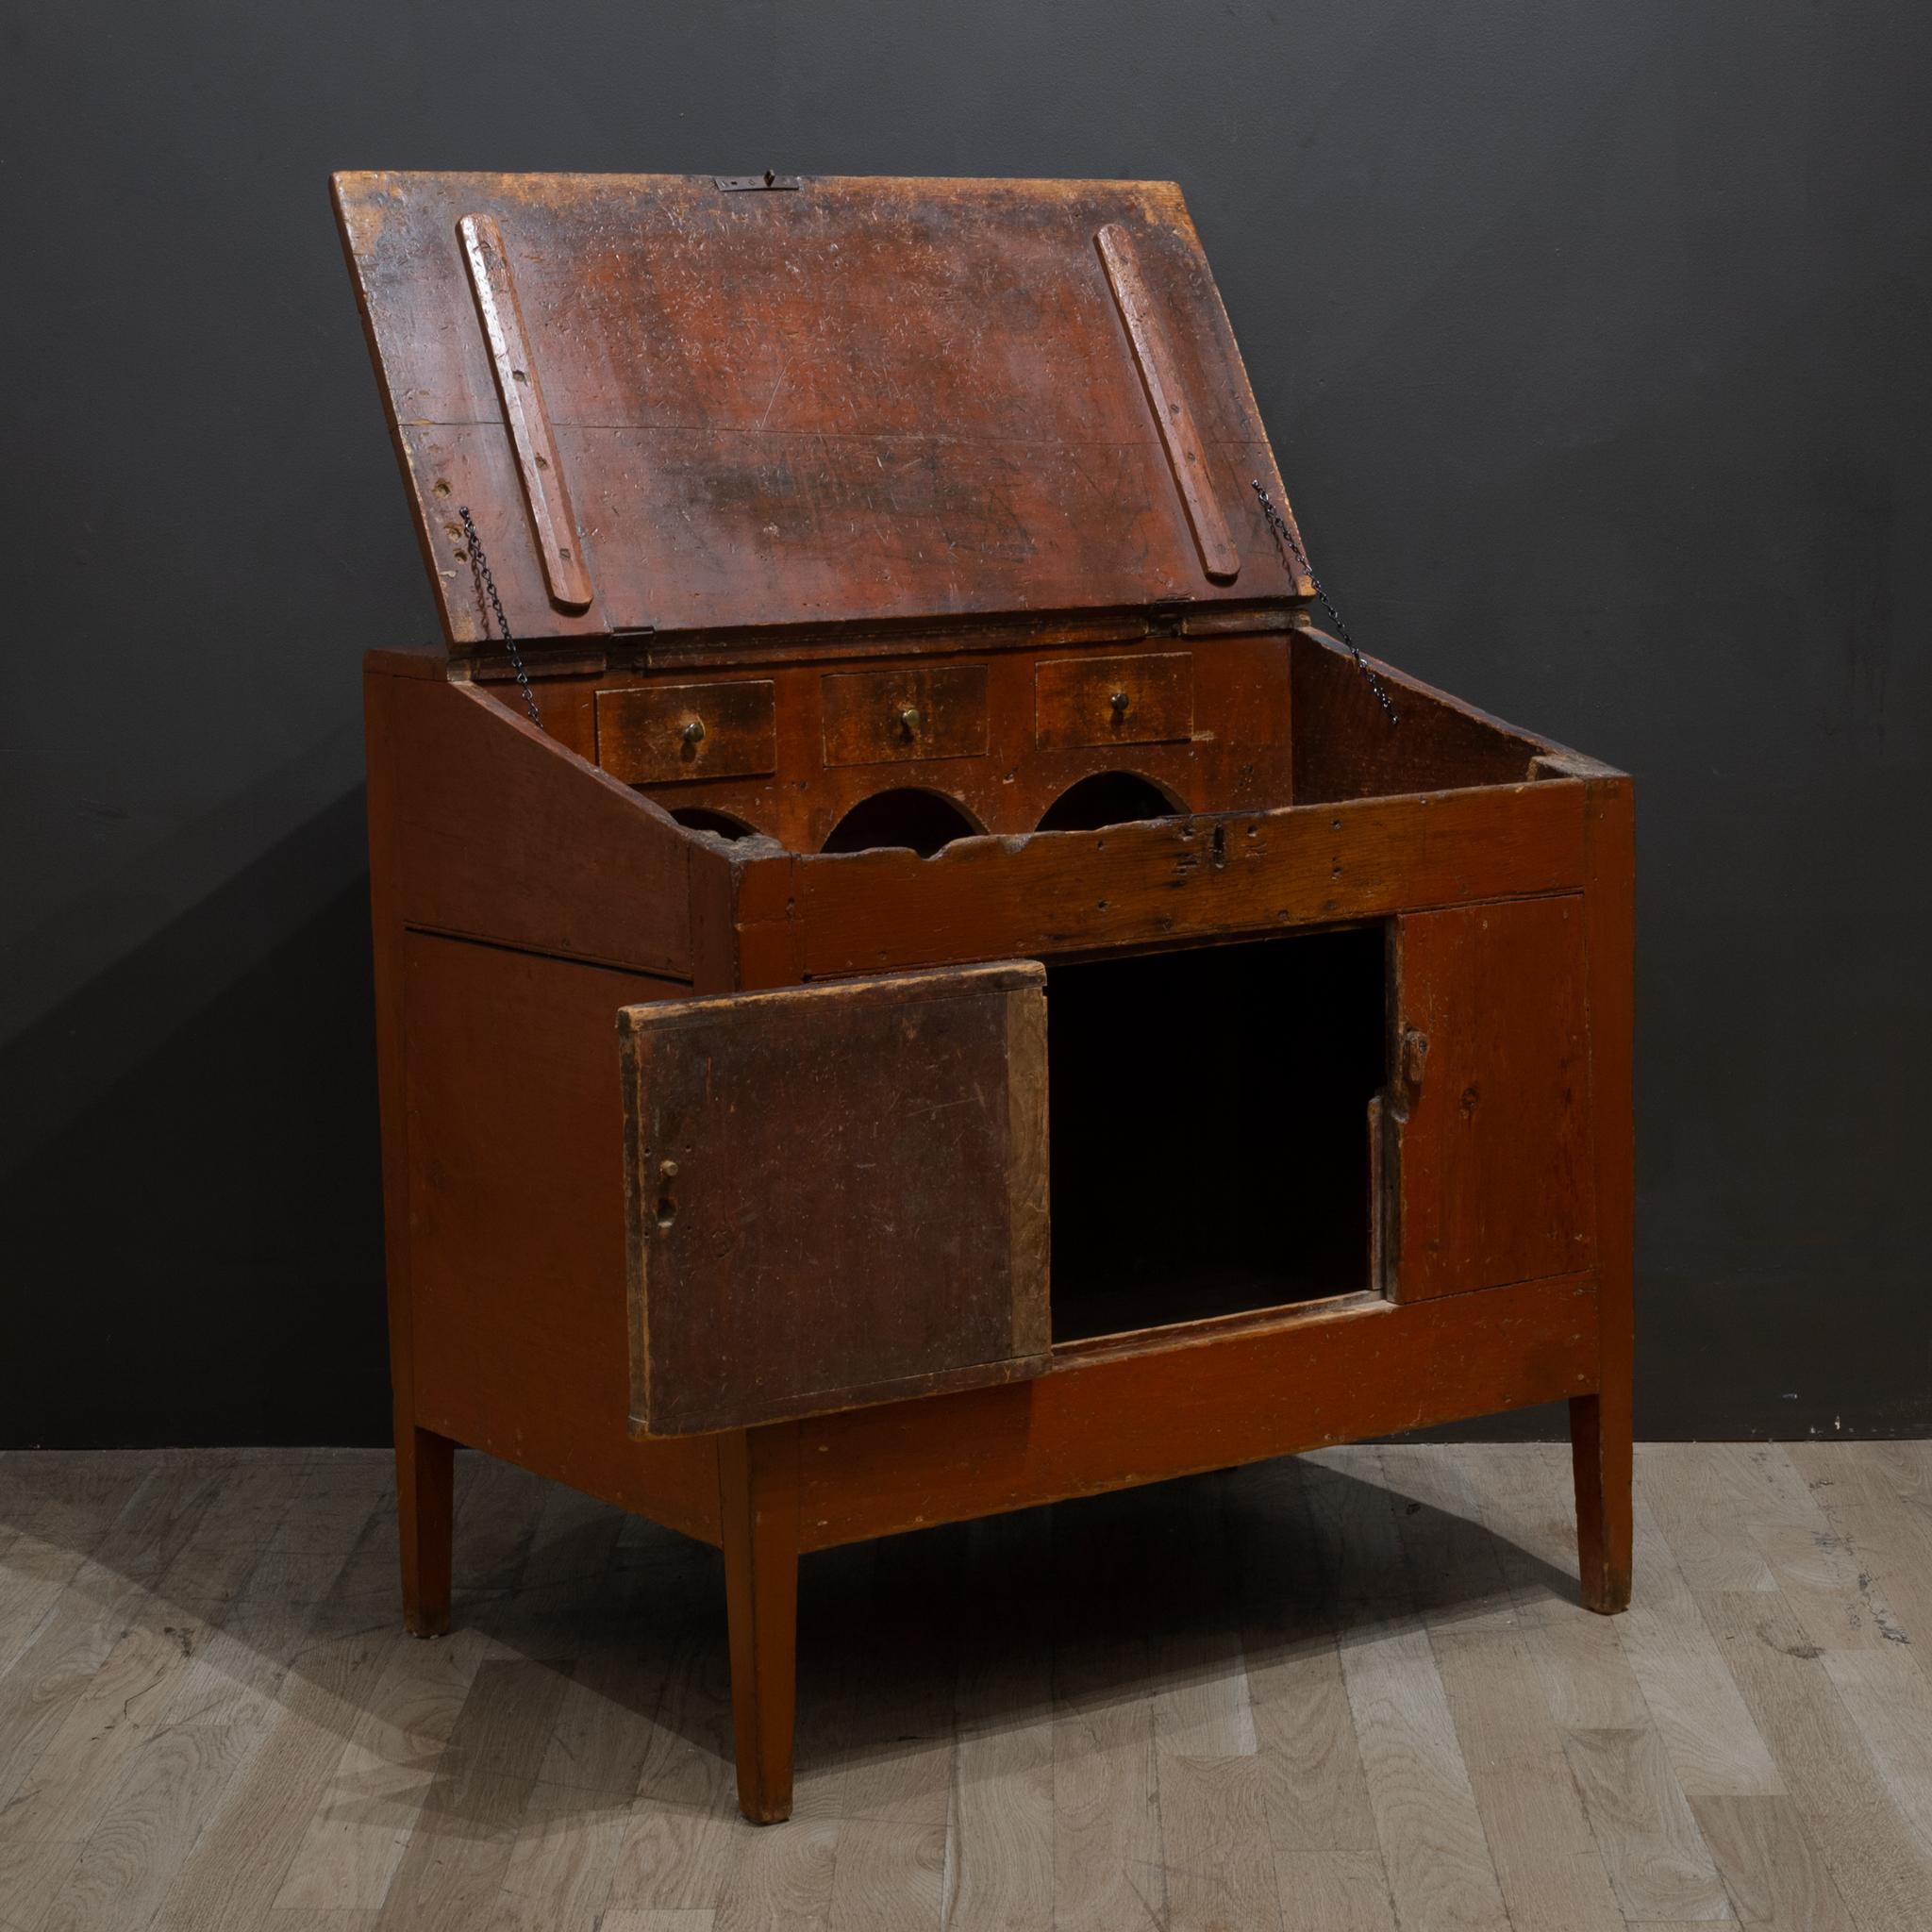 Early-Mid 19th c. Hand Painted Slant Desk, c.1820-1840 For Sale 1